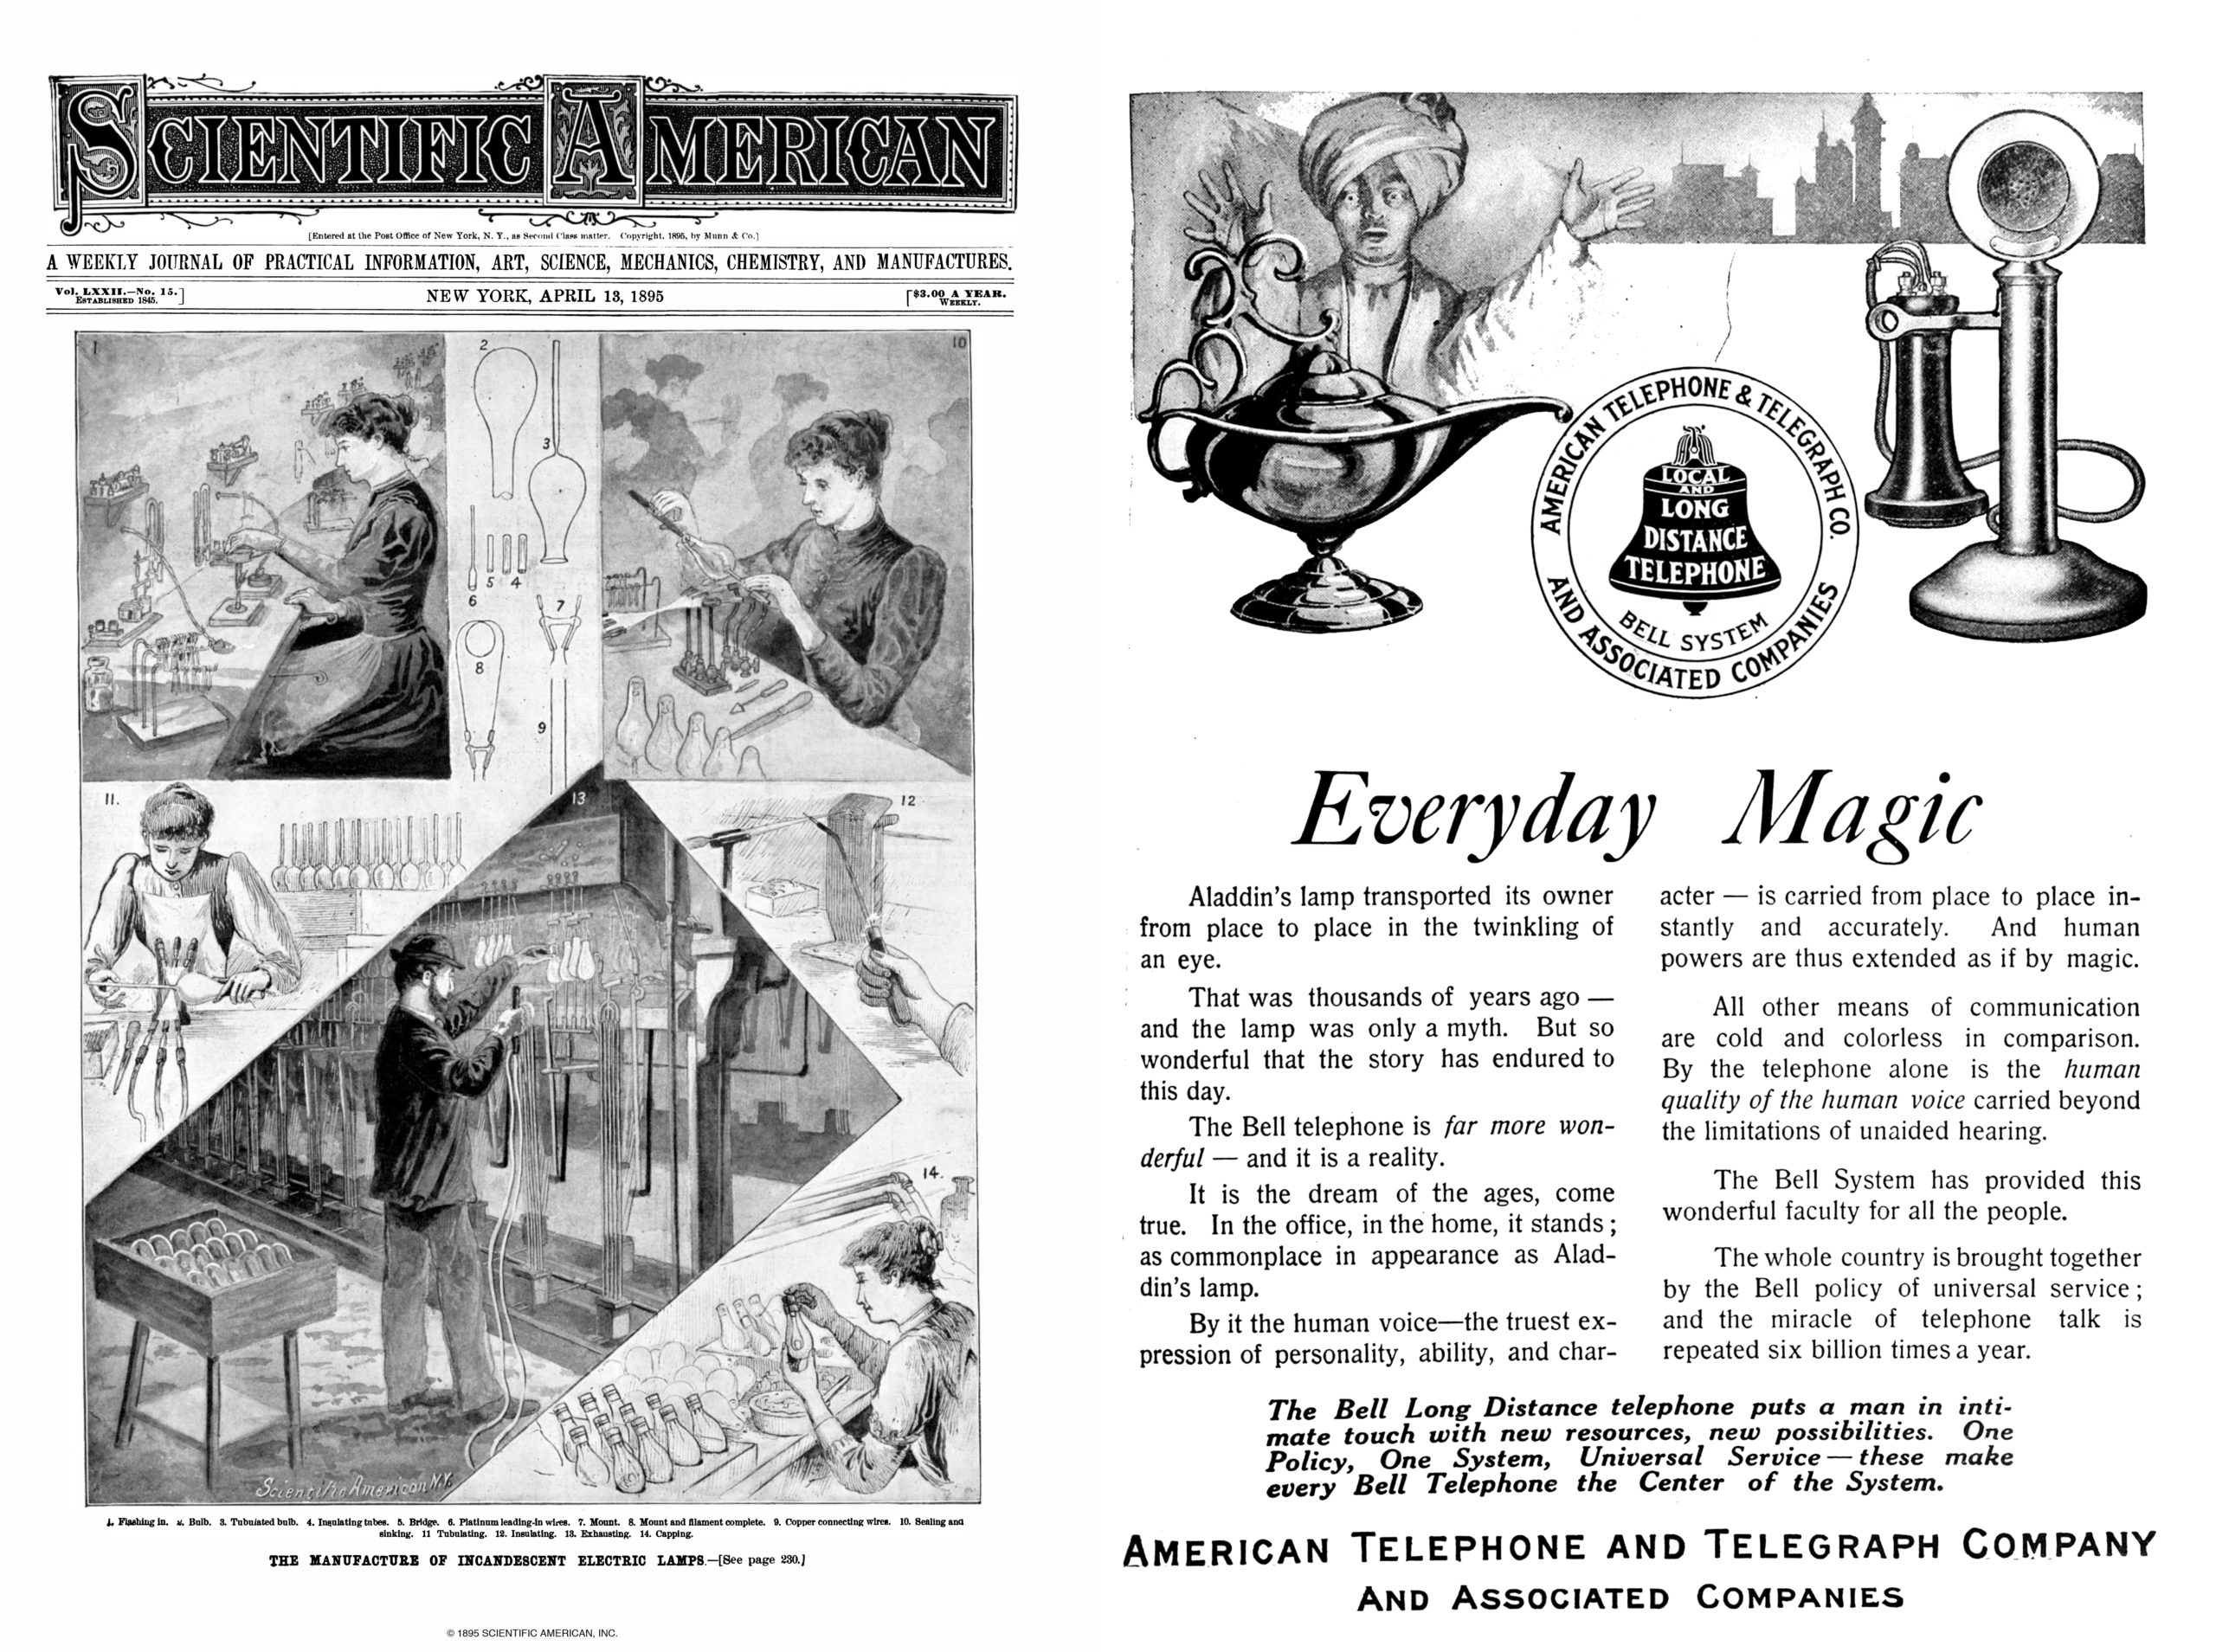 Left: Scientific American cover from April 13, 1895 on manufacturing incandescent lightbulbs; Right: AT&T ‘Everyday Magic’ advertisement for the Bell System telephone, Popular Mechanics, March 1910